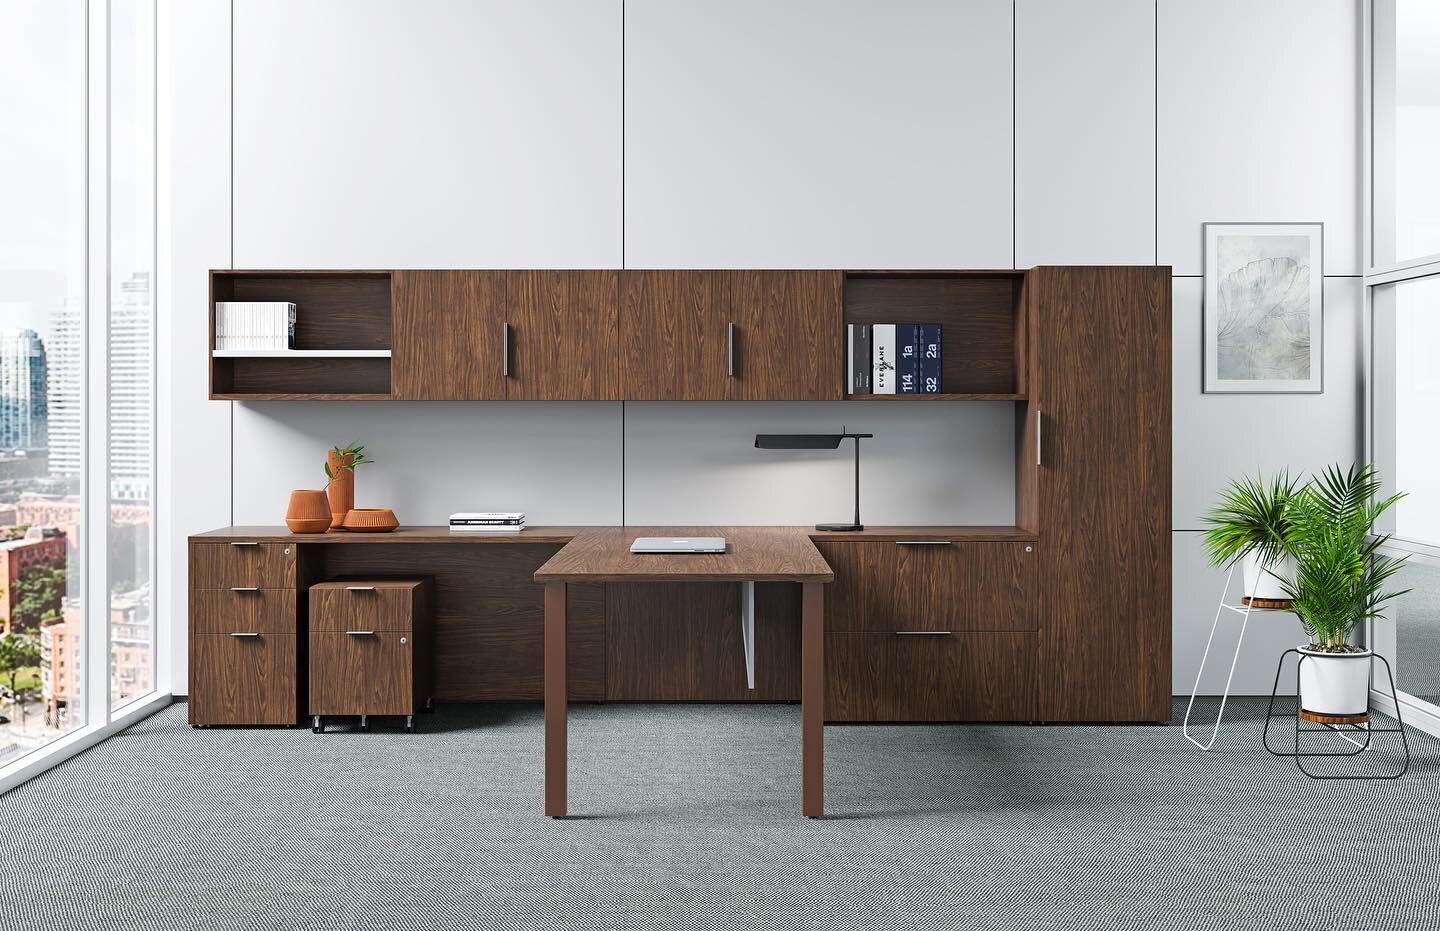 @threehfurniture is on CET y&rsquo;all!

So many options from their workplace solutions including Premier Select! The ultimate #privateofficefurniture collection! 

See more:

https://my.configura.com/index.pl?page=marketplace&amp;section=productinfo